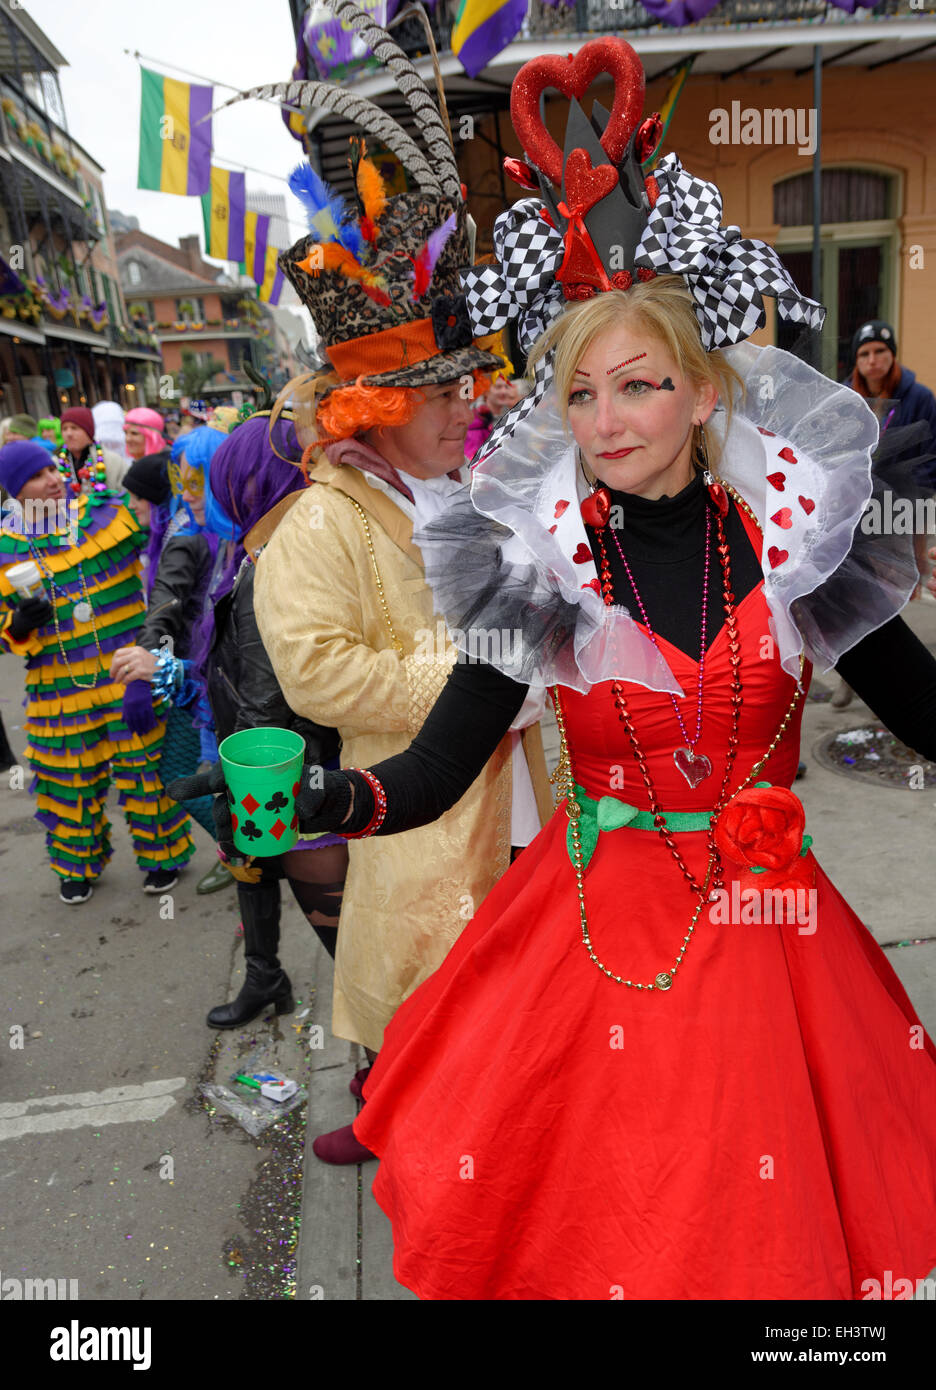 Queen of Harts, Mardi Gras 2015, St Ann's Parade, French Quarter, New Orleans, Louisiana, USA Stock Photo